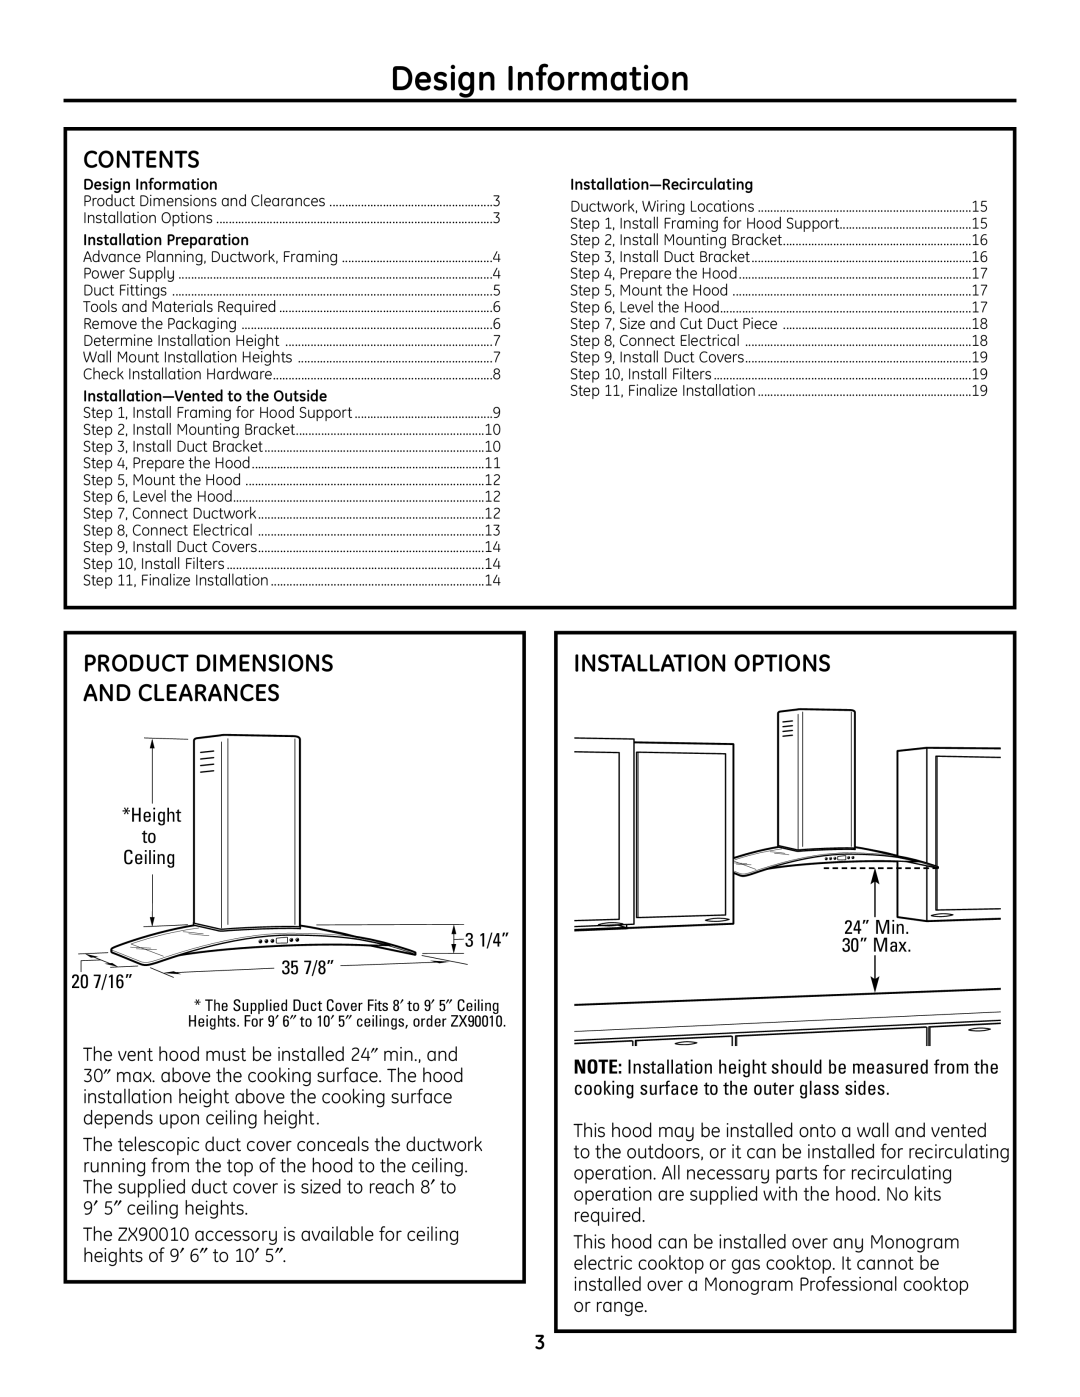 GE ZV900 installation instructions Design Information, Contents, Installation Options, Product Dimensions And Clearances 